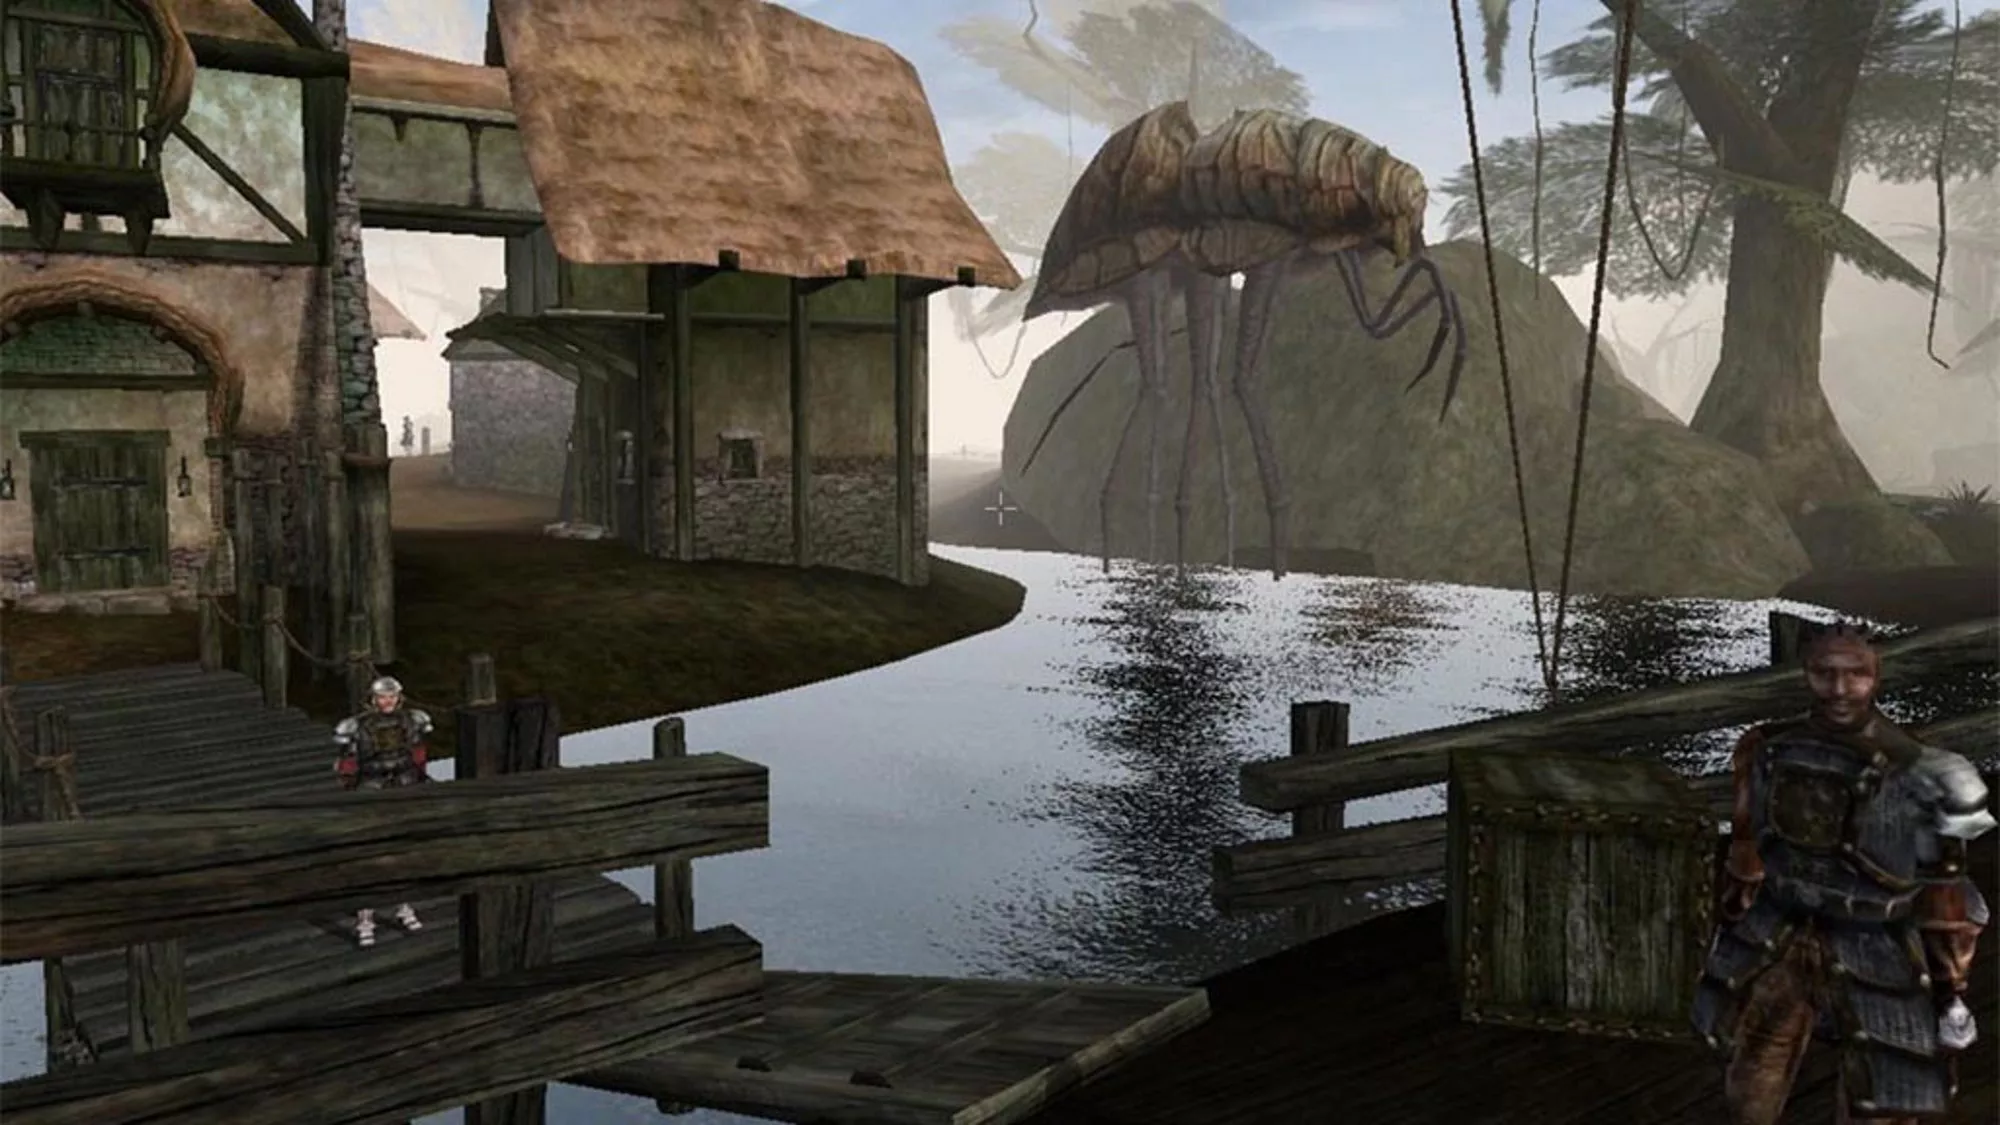 OpenMW is a fan-made project to crack into the Morrowind engine